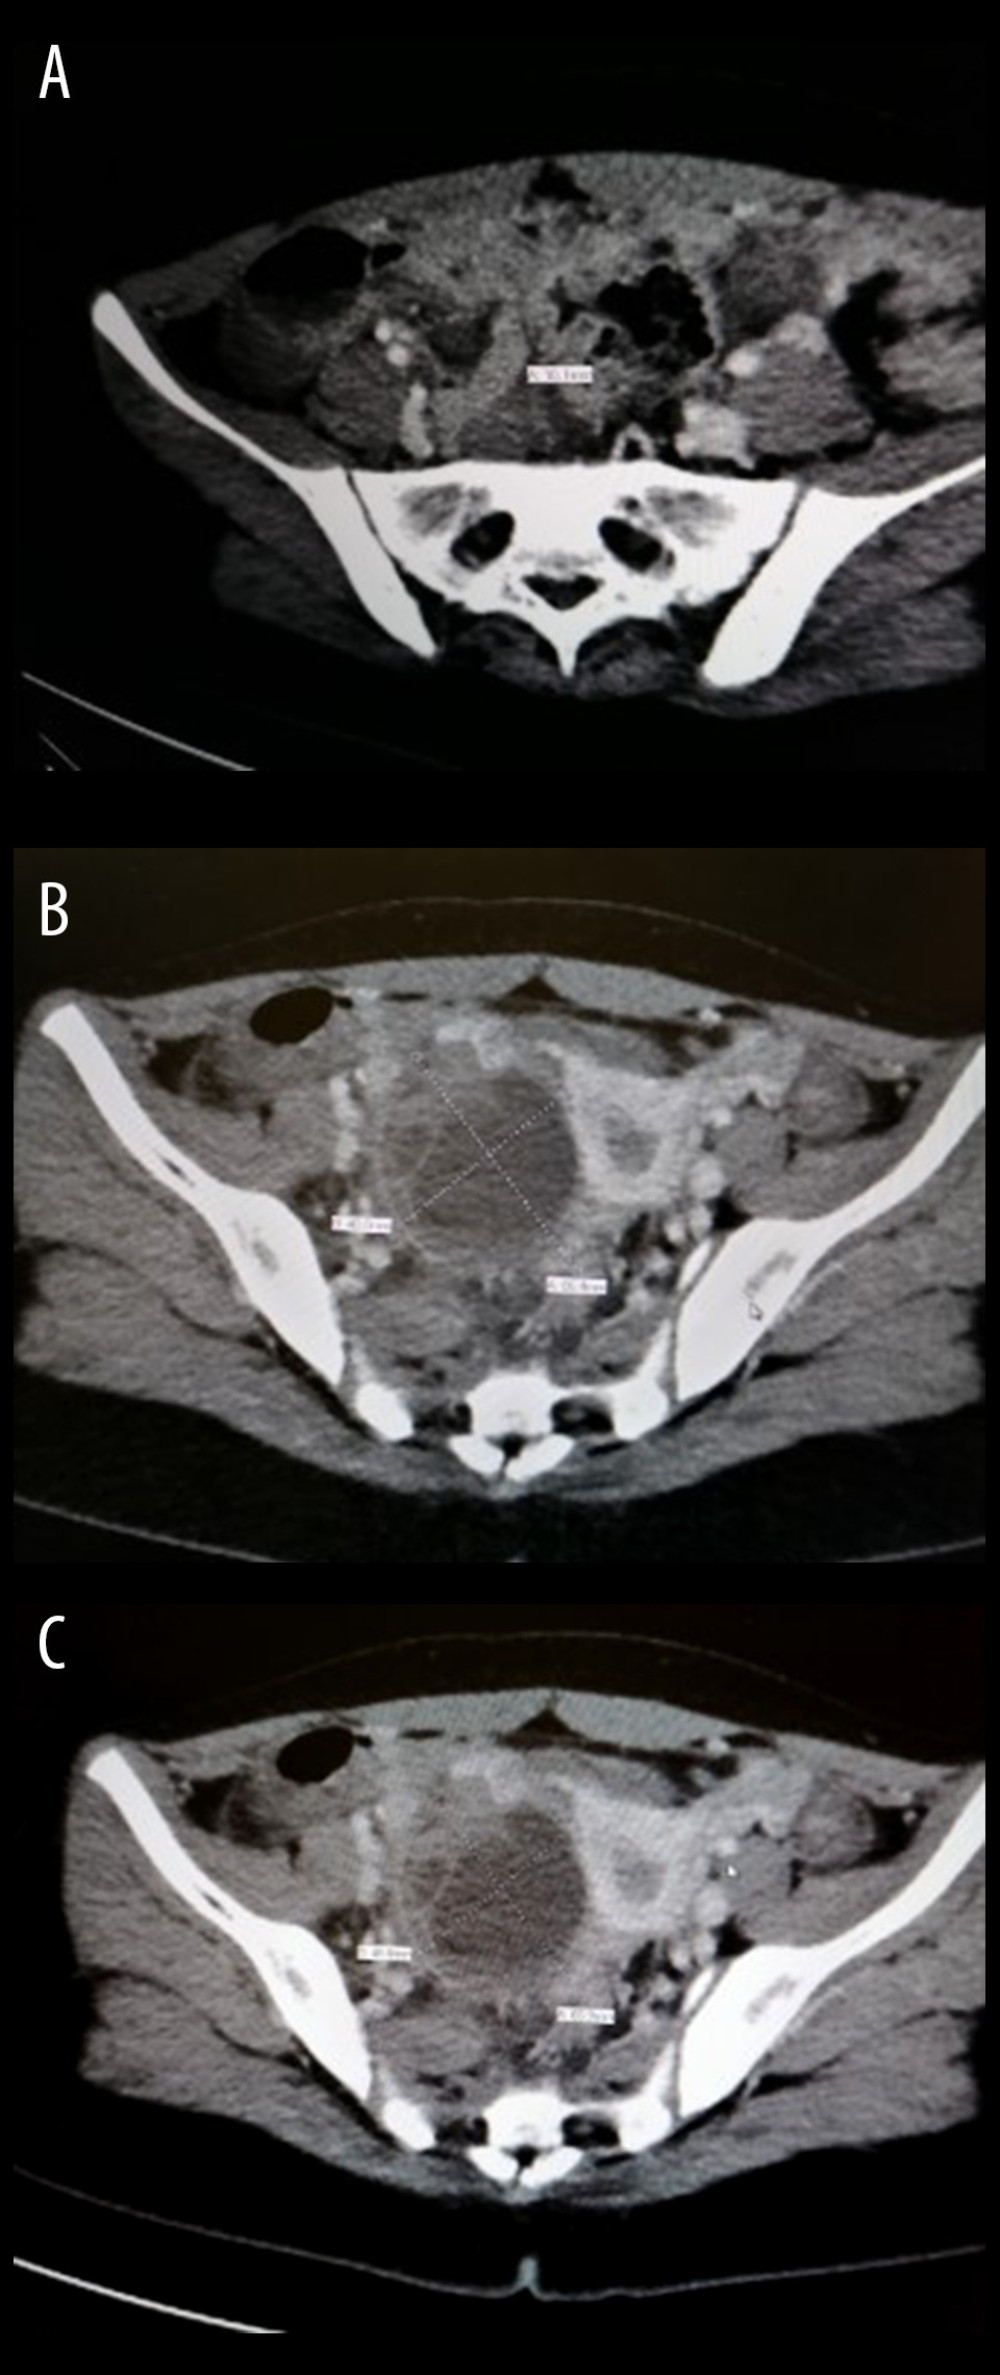 Coronal view of the abdominal and pelvic CT with intravenous contrast showing (A) an appendix with a thickened enhancing edematous wall in the right iliac fossa measuring about 10 mm in diameter; (B) moderate free fluid in the right iliac fossa, hepatorenal pouch, and pelvic region; (C) right adnexal cystic structure with septation, hyperdense component, and thickened wall, measuring about 6.5×4.8 cm.